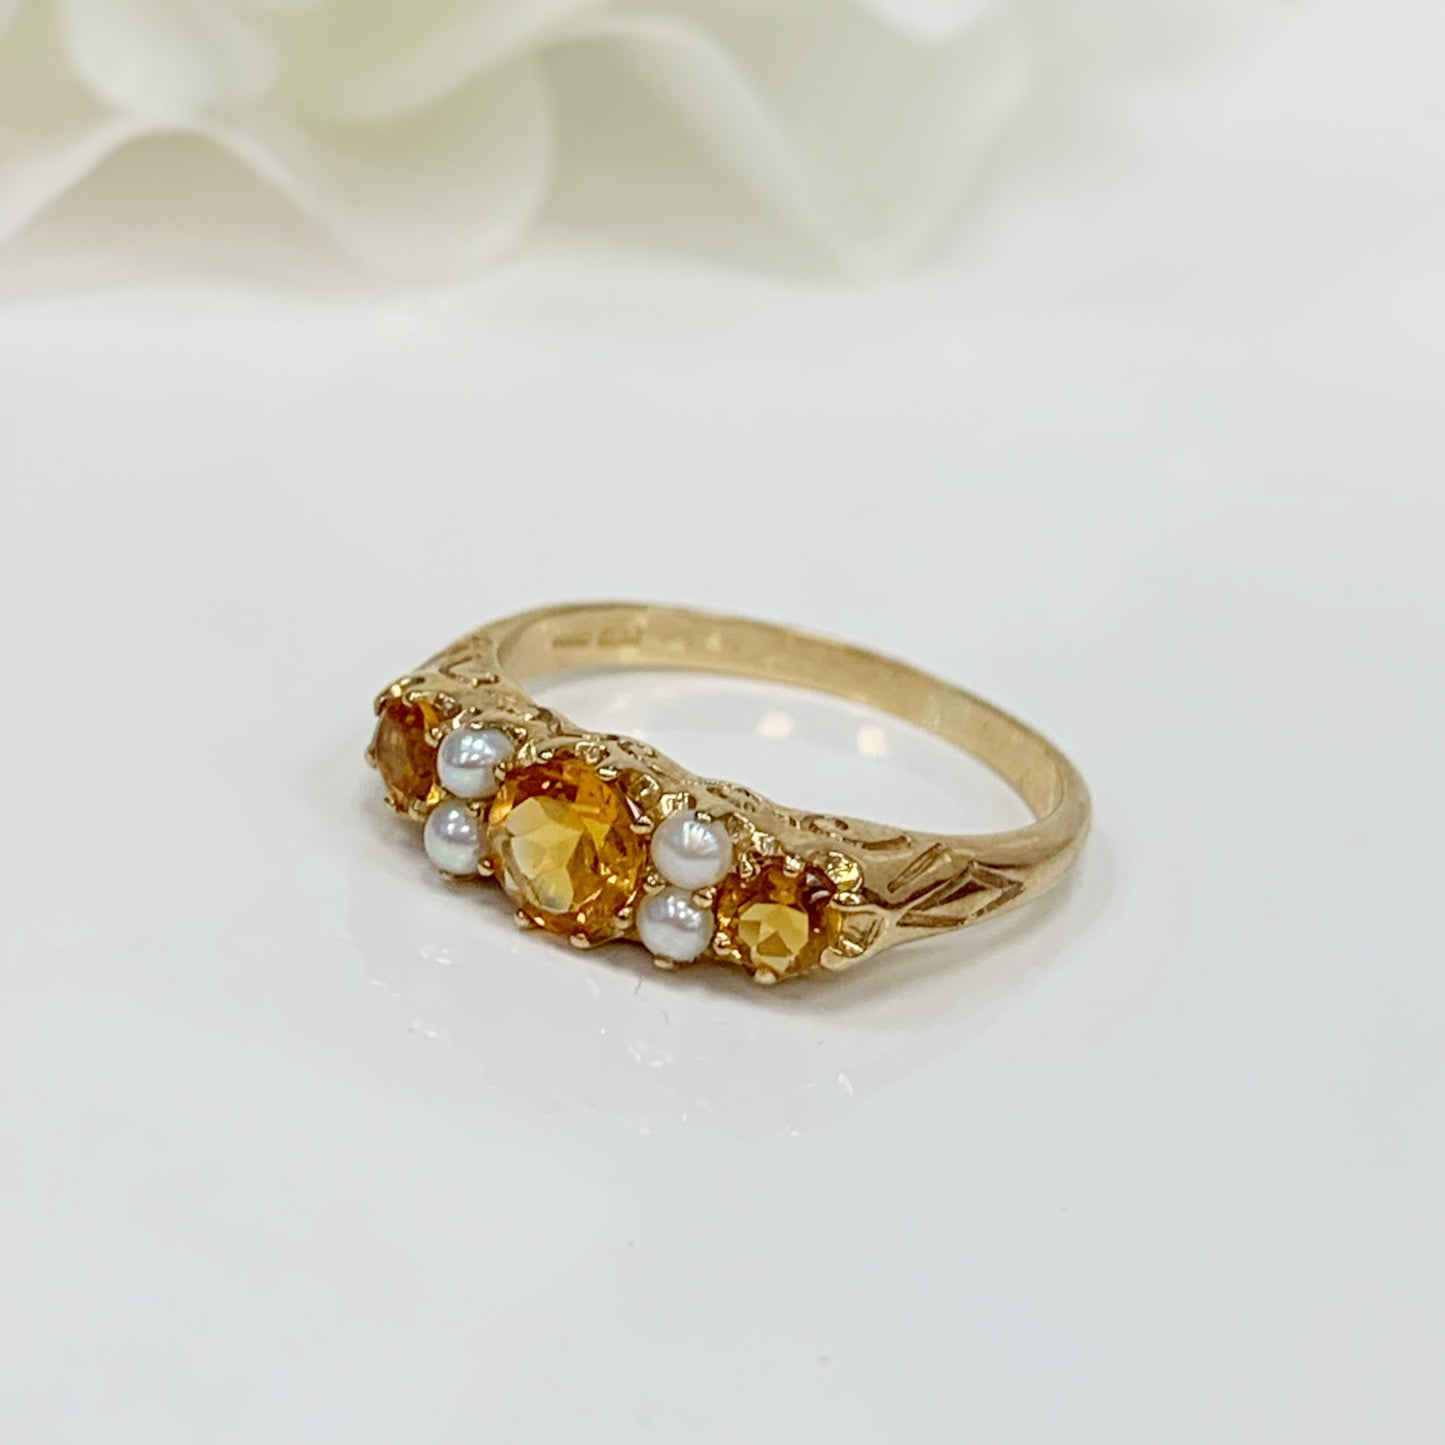 Edwardian Inspired 9ct Yellow Gold Citrine and Pearl Ring - SIZE O